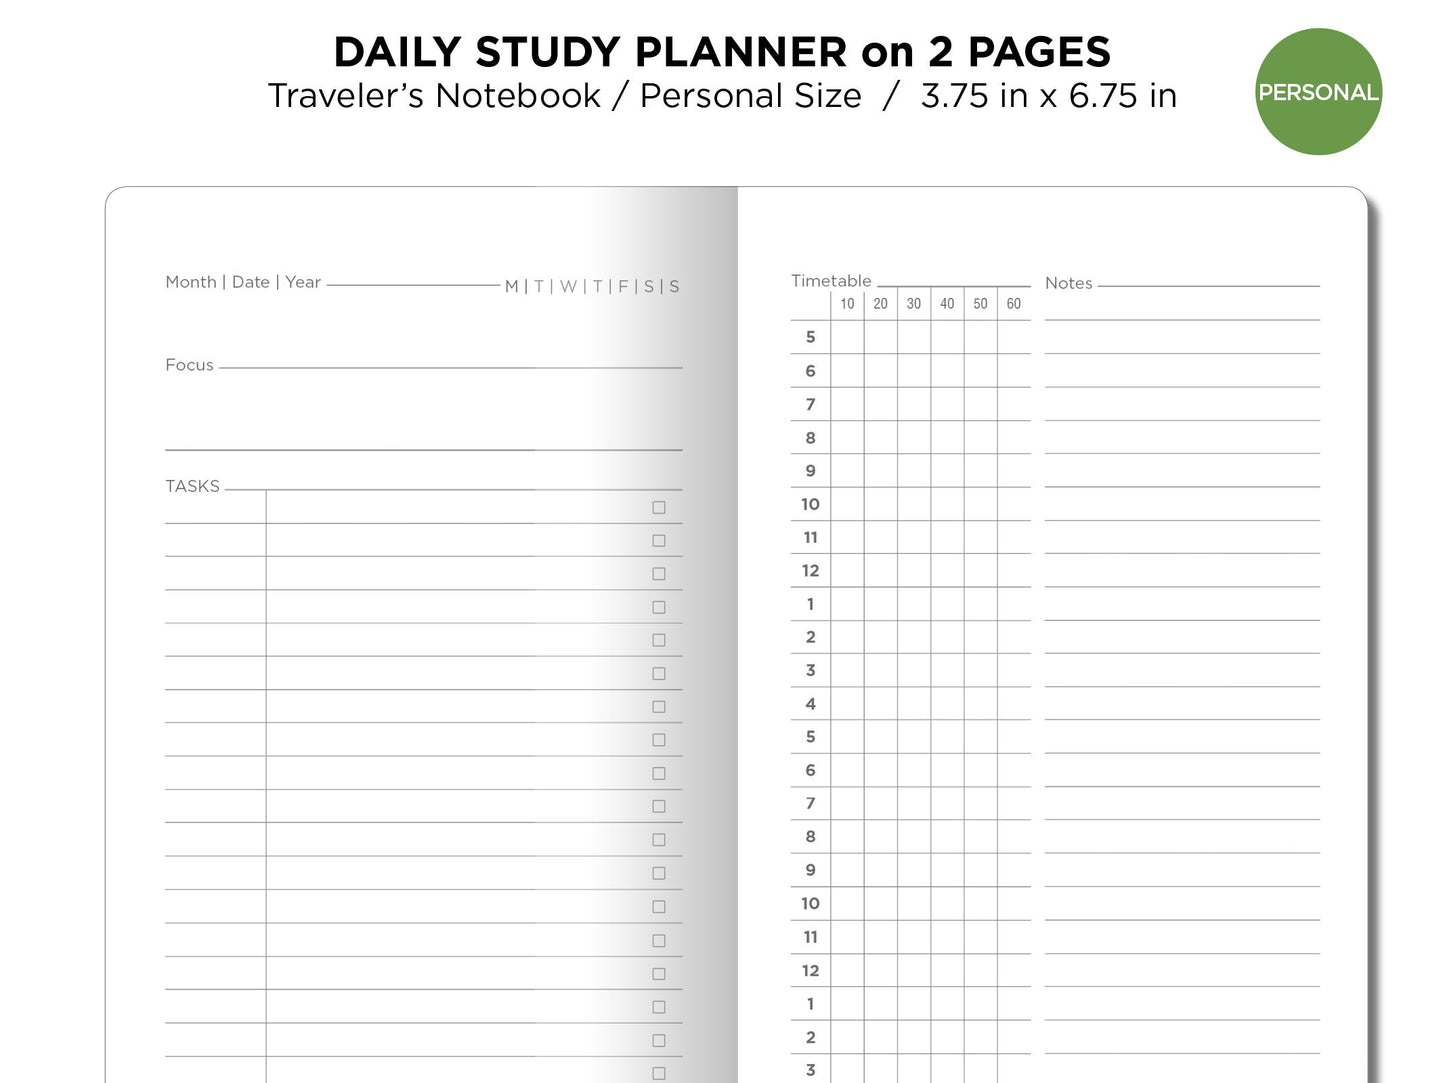 STUDY Planner Daily View on 2 Pages PERSONAL Size Traveler's Notebook Printable Planner Insert